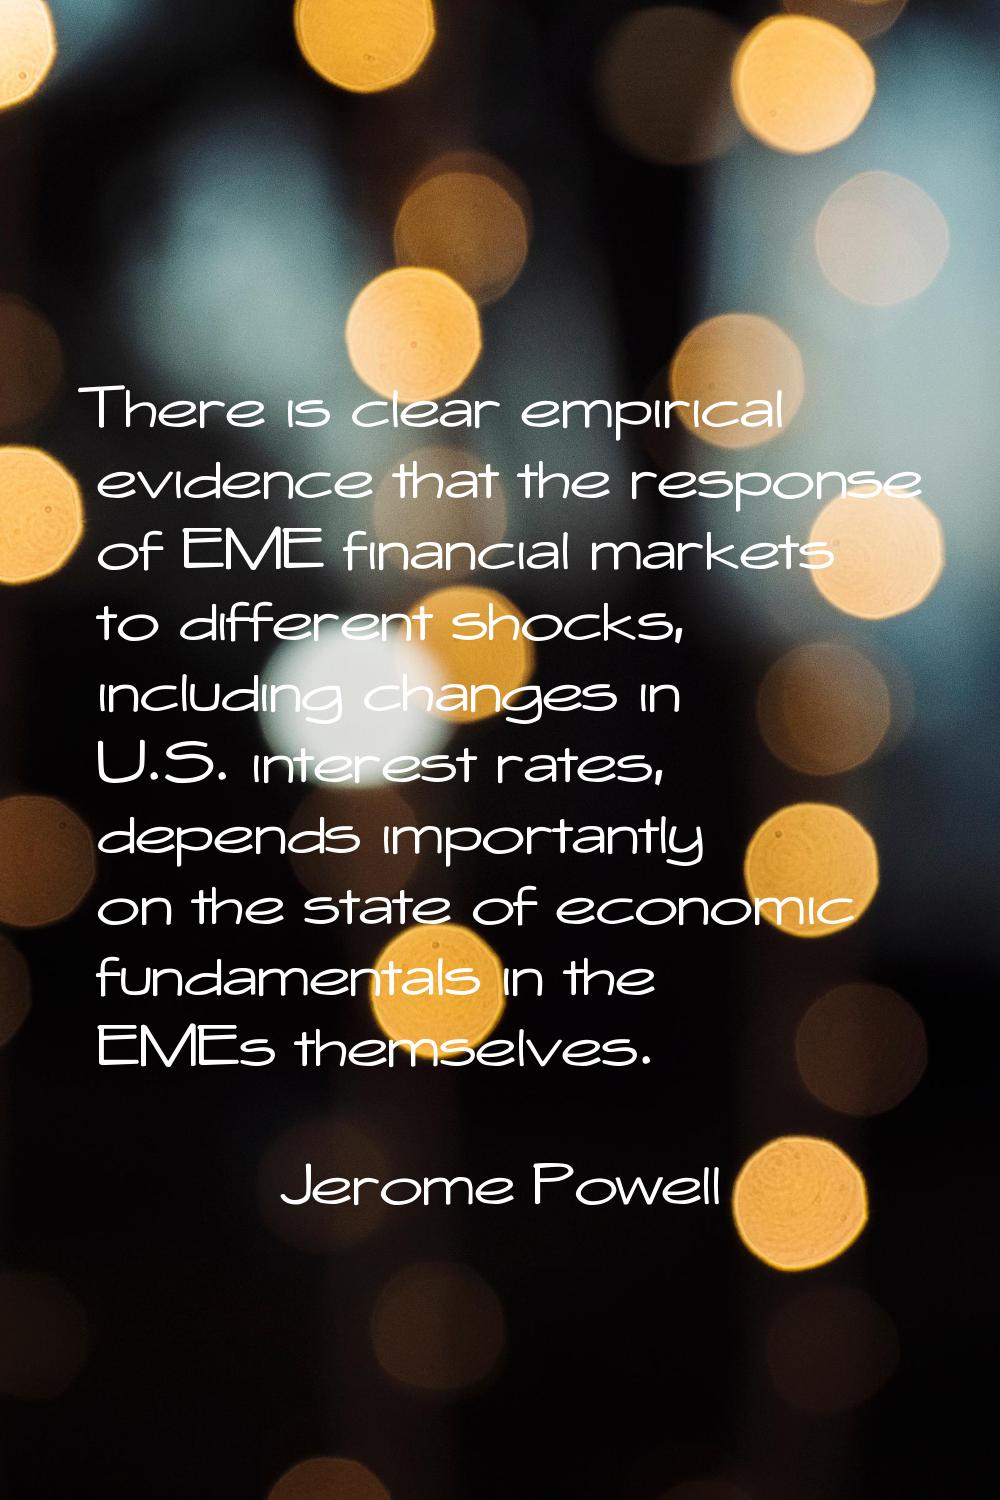 There is clear empirical evidence that the response of EME financial markets to different shocks, i